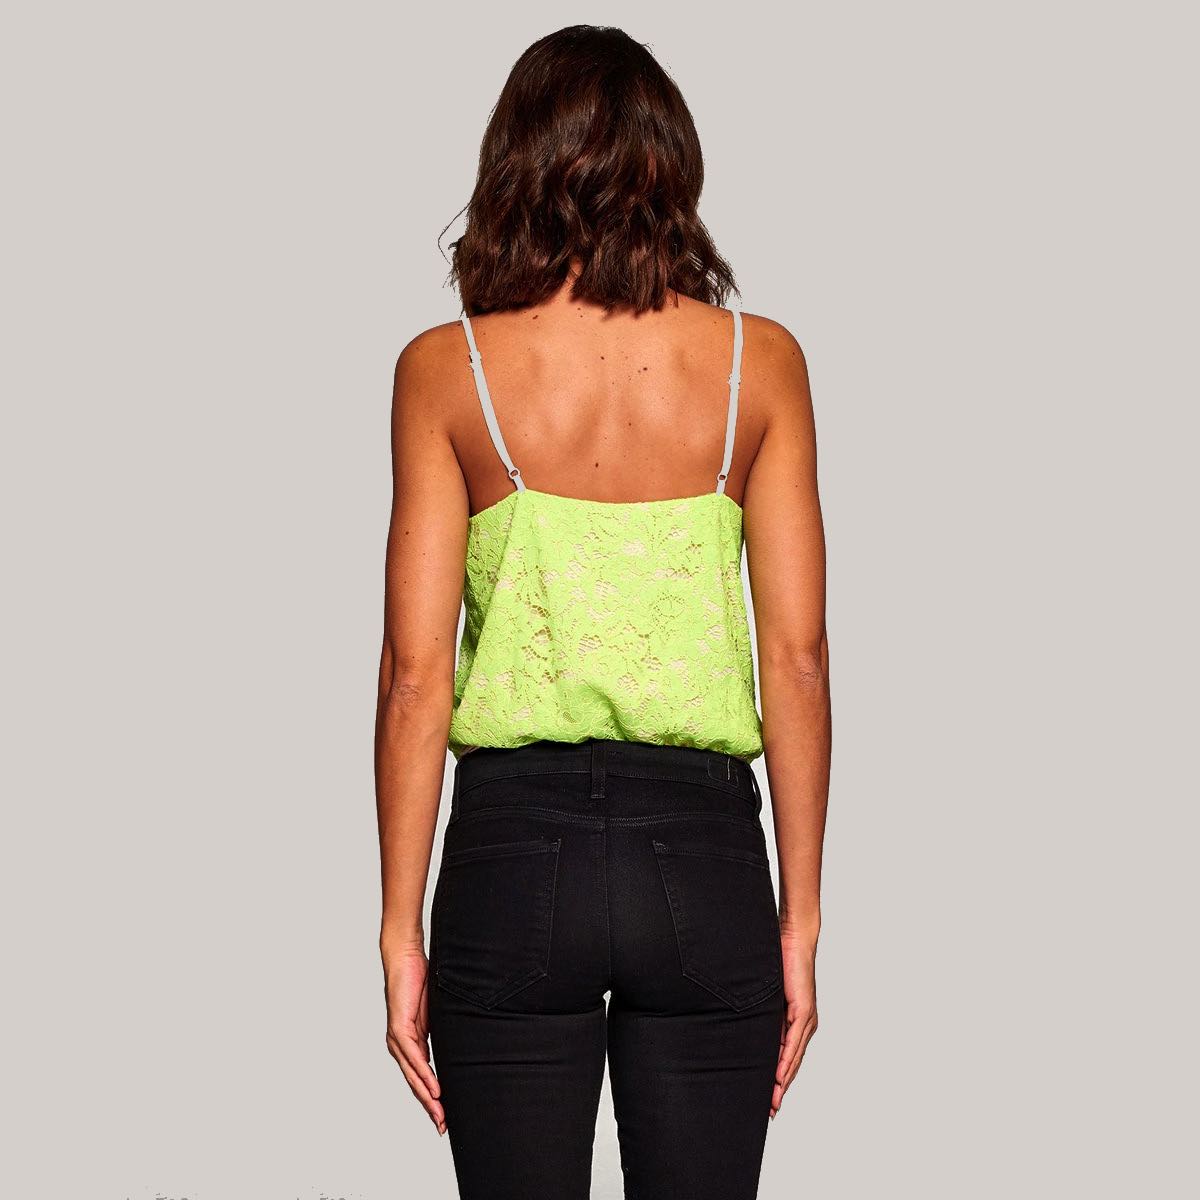 Lot composed of a sleeveless top in neon yellow lace, ro…